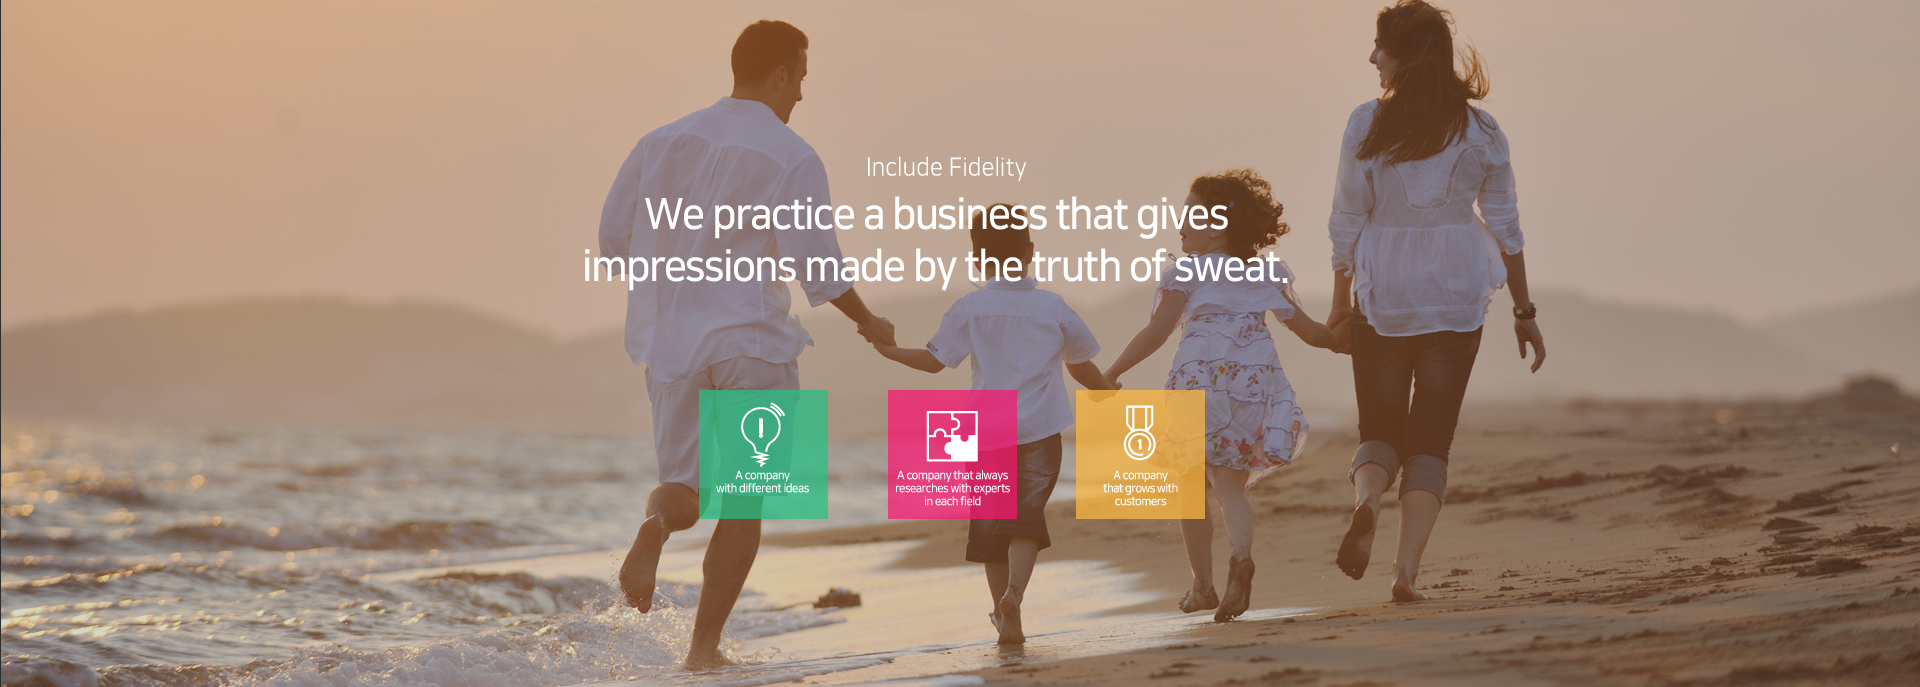 Include Fidelity - We practice a business that gives impressions made by the truth of sweat.